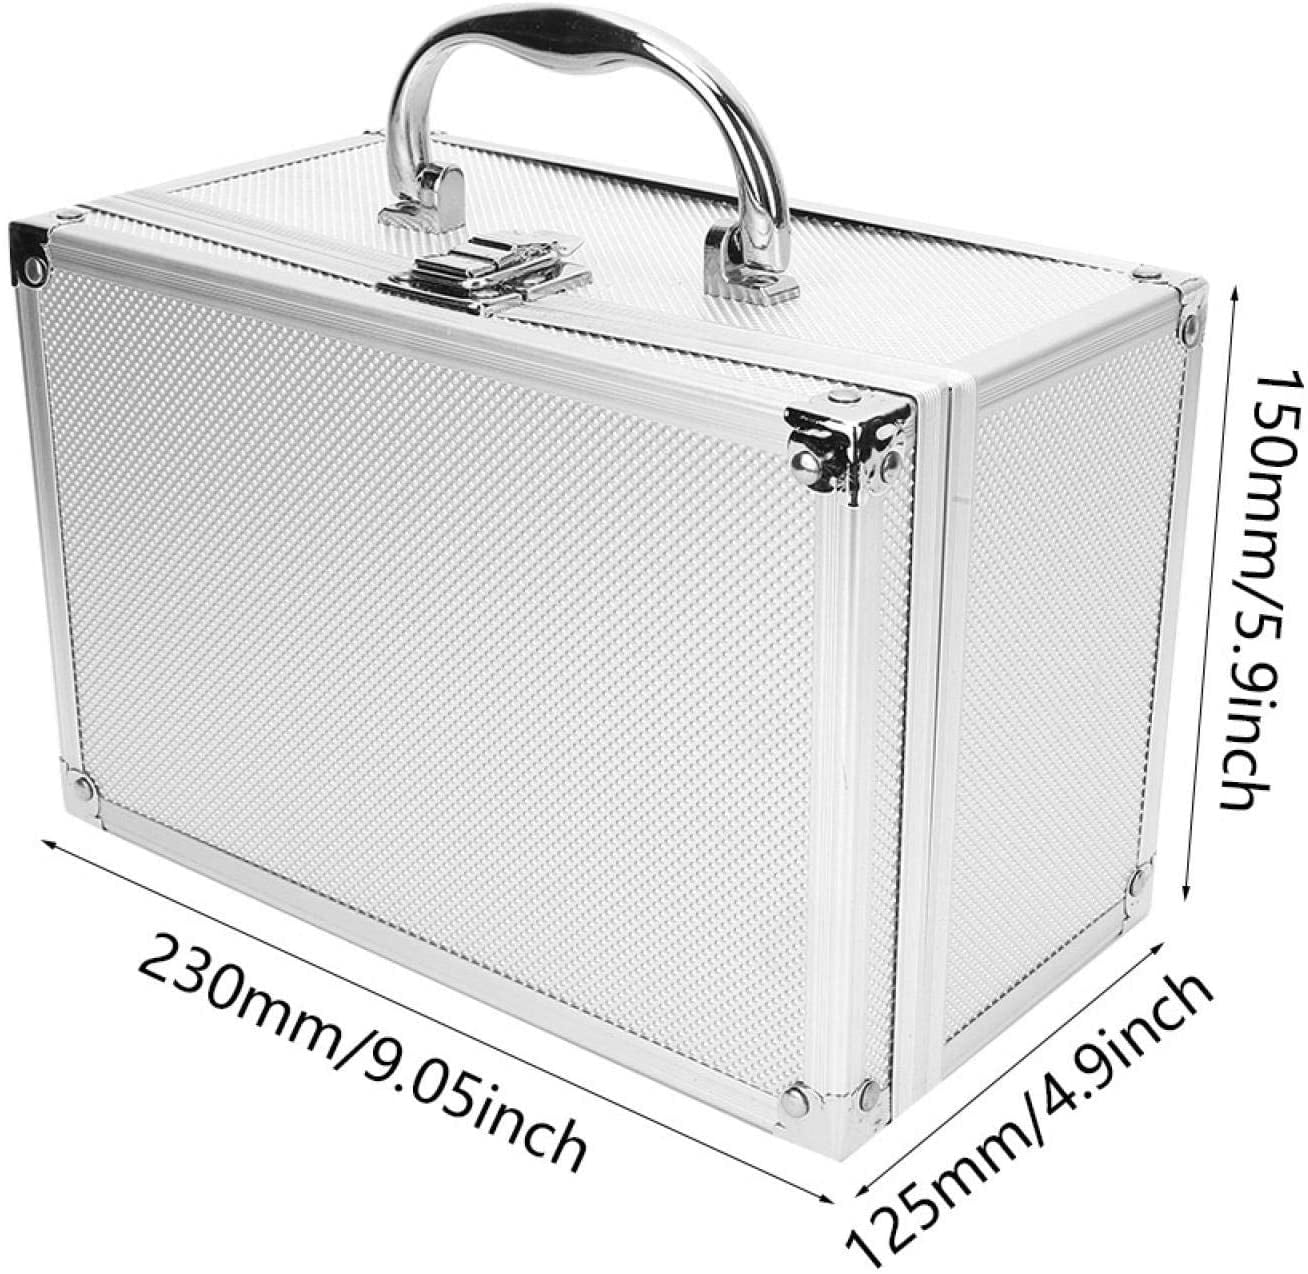 Details about   Tool Box Case Aluminum Alloy Metal Outdoor Vehicle Kit Portable Safety Equipment 